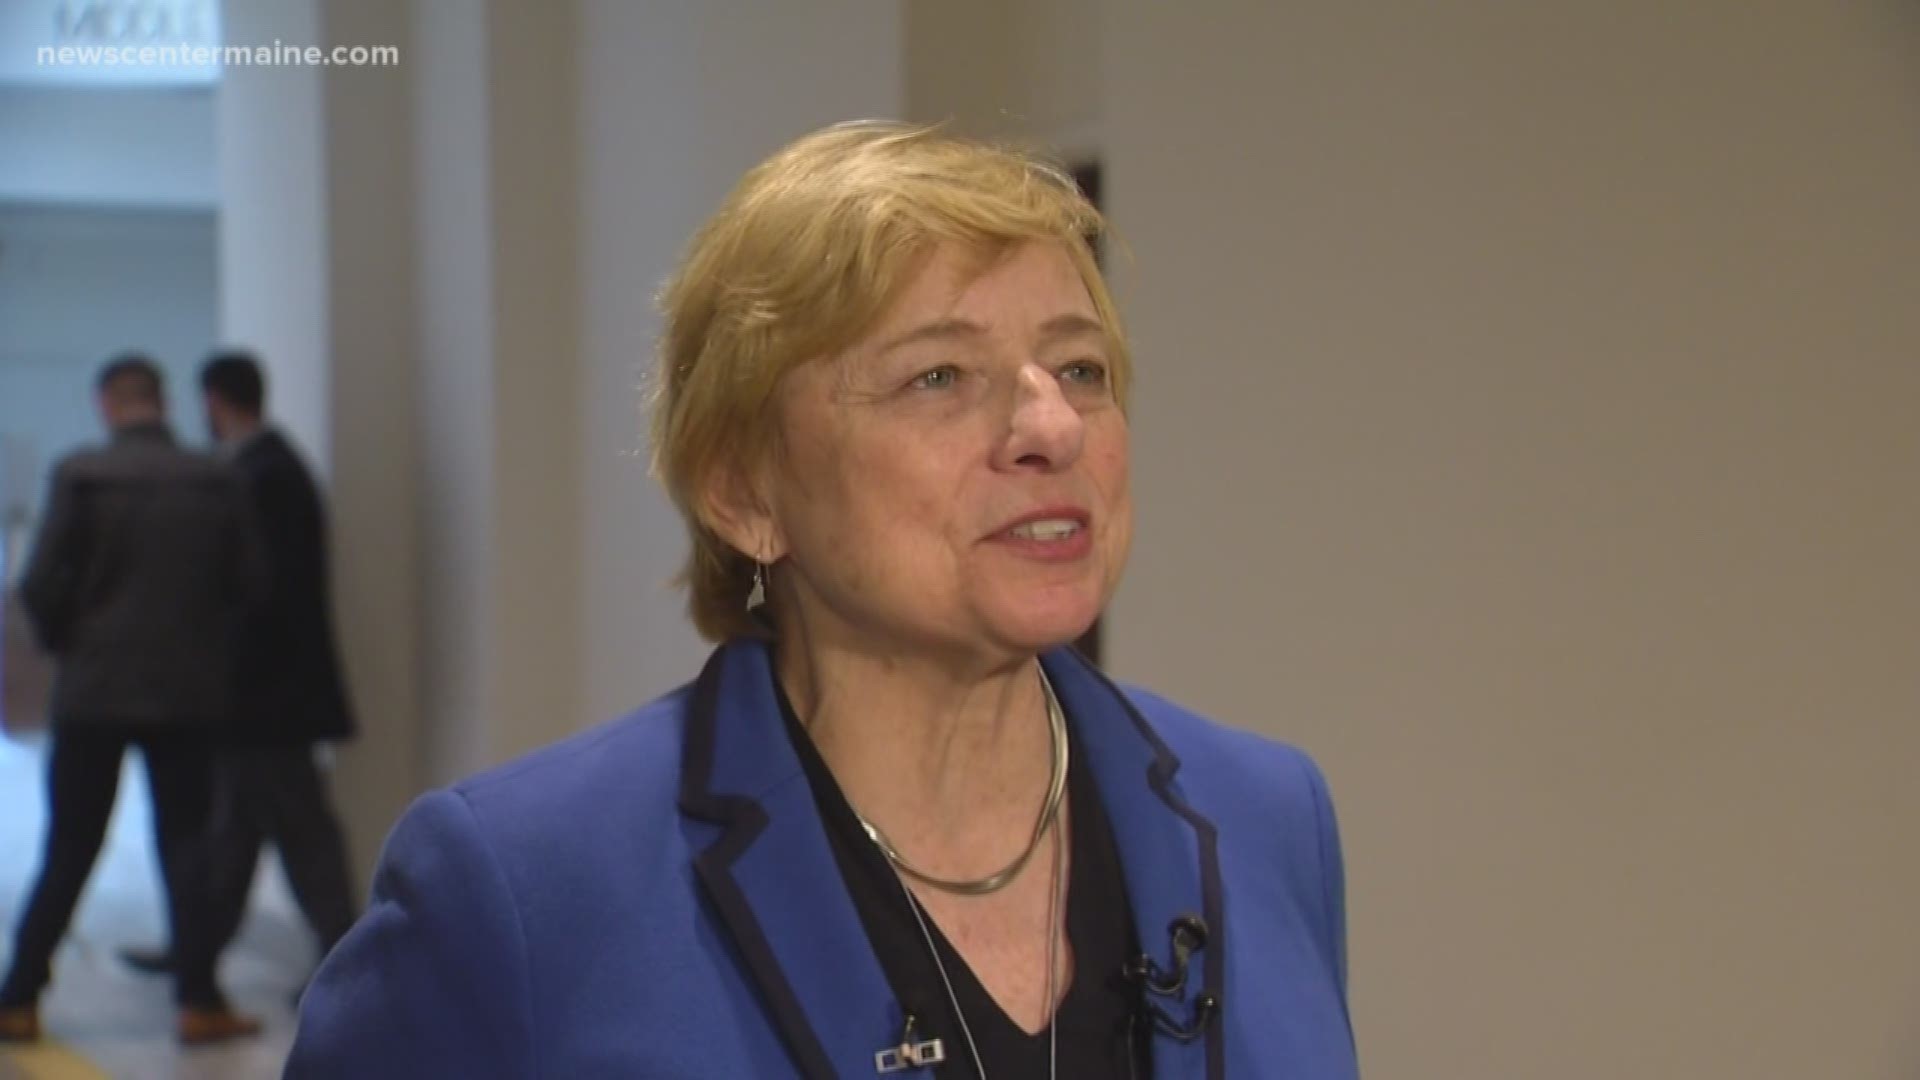 The court case is being considered after Gov. Janet Mills proposed a bill that would also expand Maine's list of abortion providers.